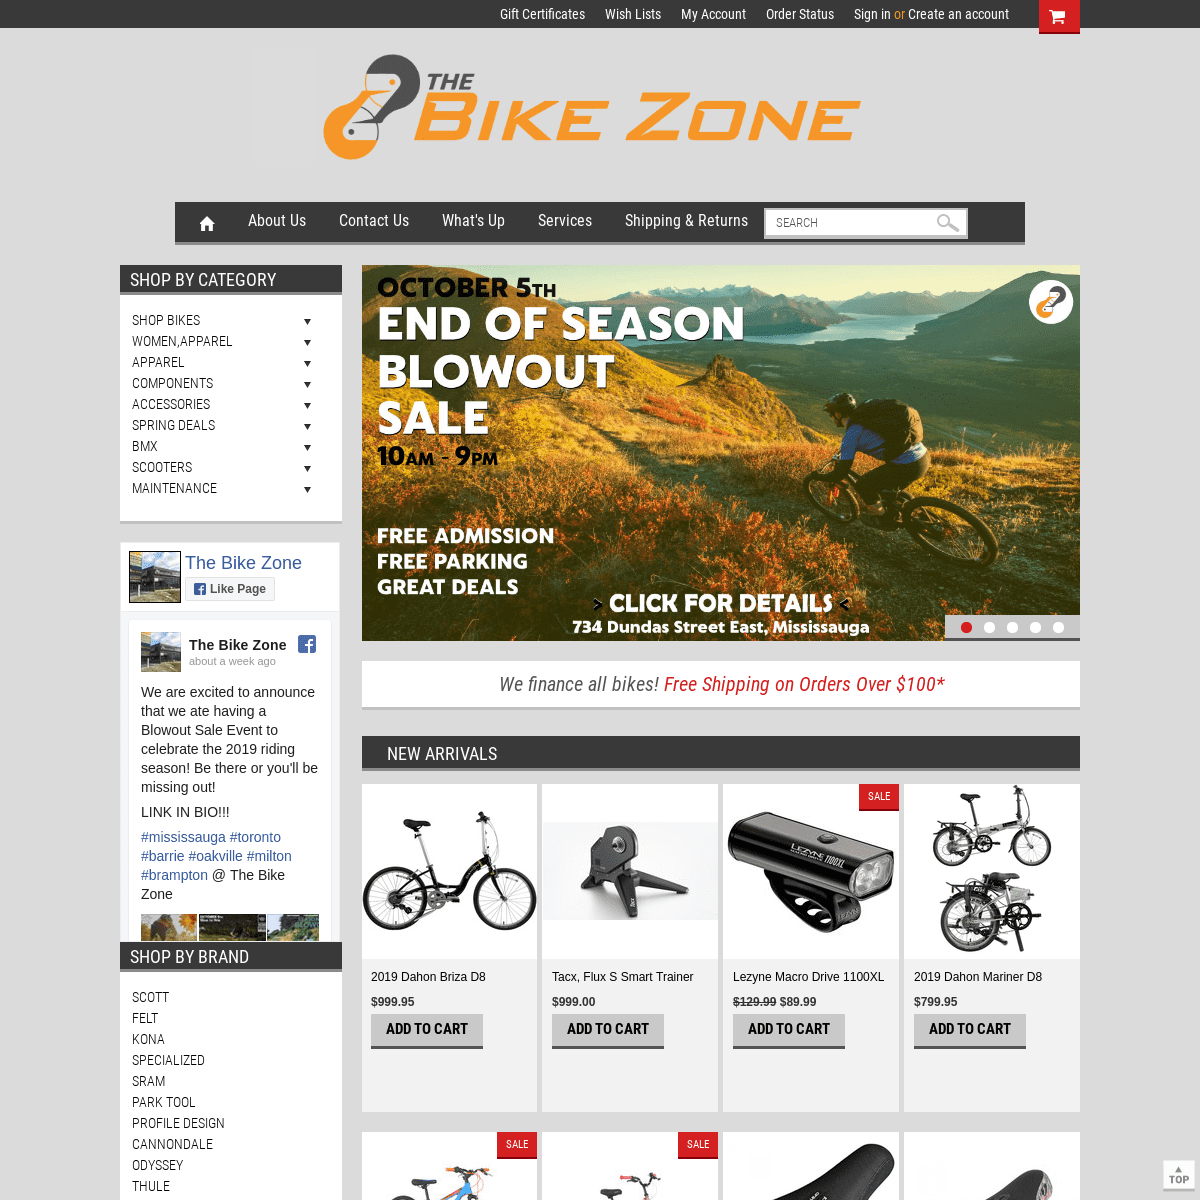 The Bike Zone - Free Shipping on Orders Over $100!